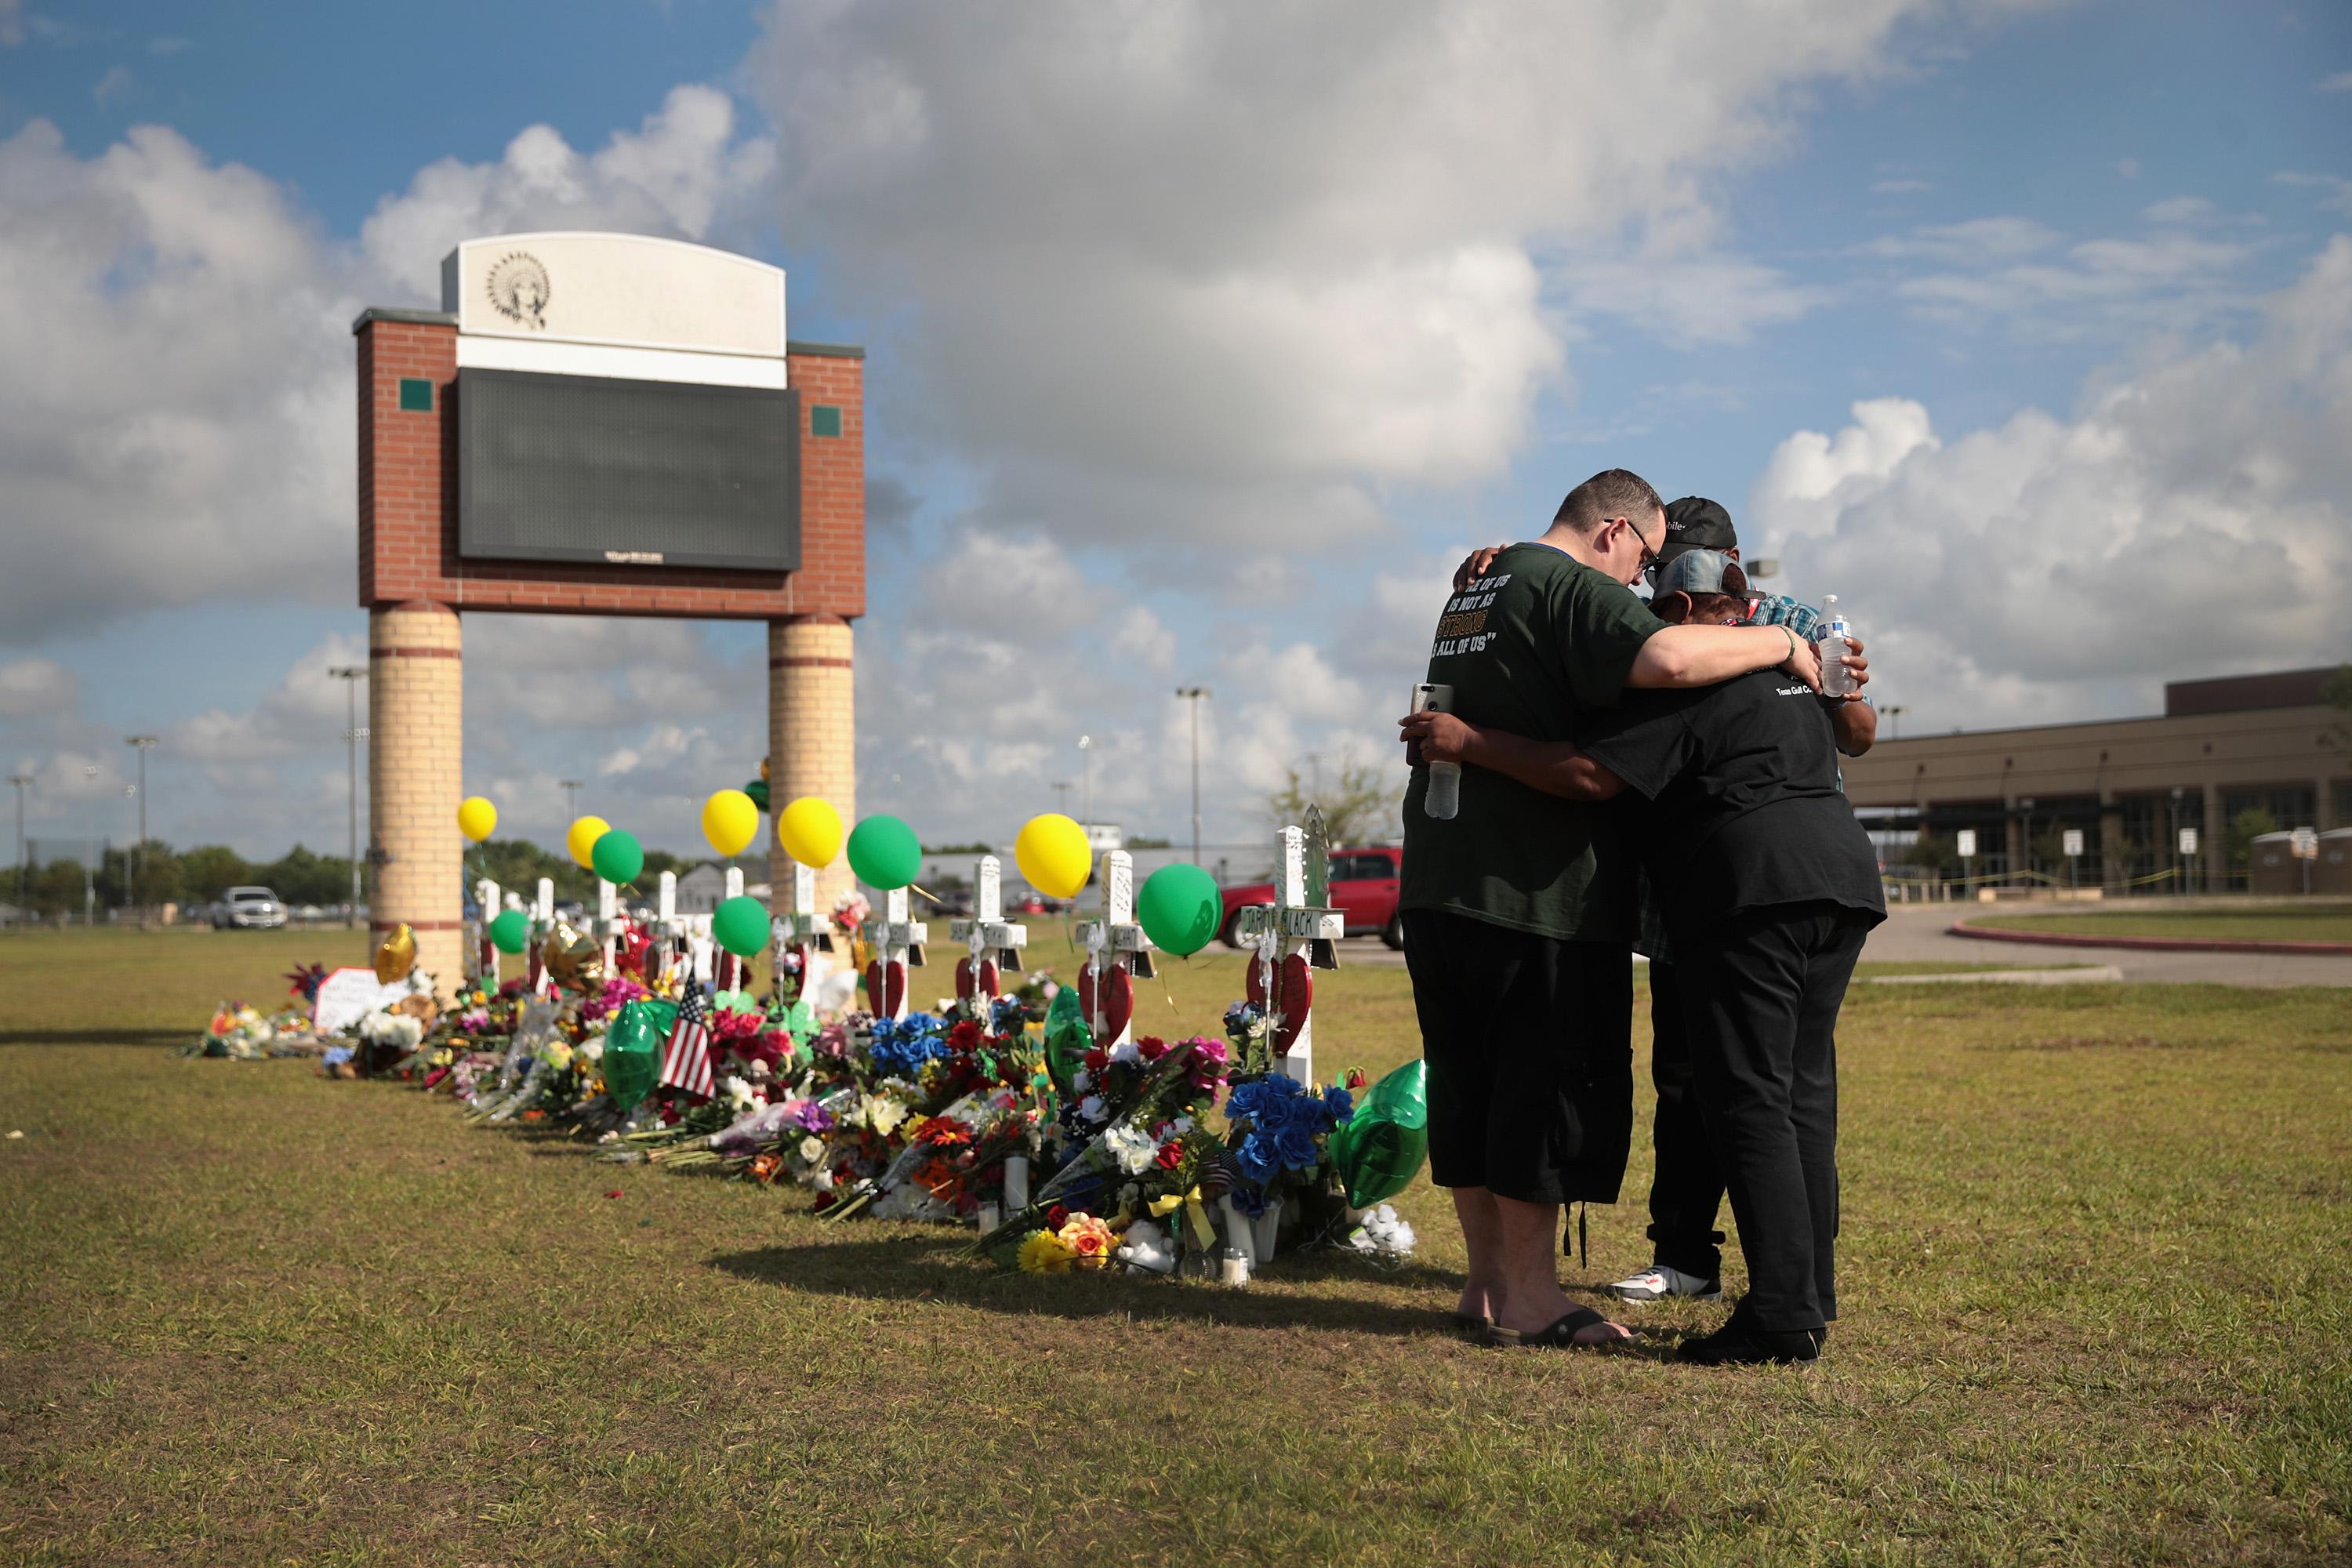 Mourners pray at a memorial in front of Santa Fe High School on May 22, 2018 in Santa Fe, Texas. 